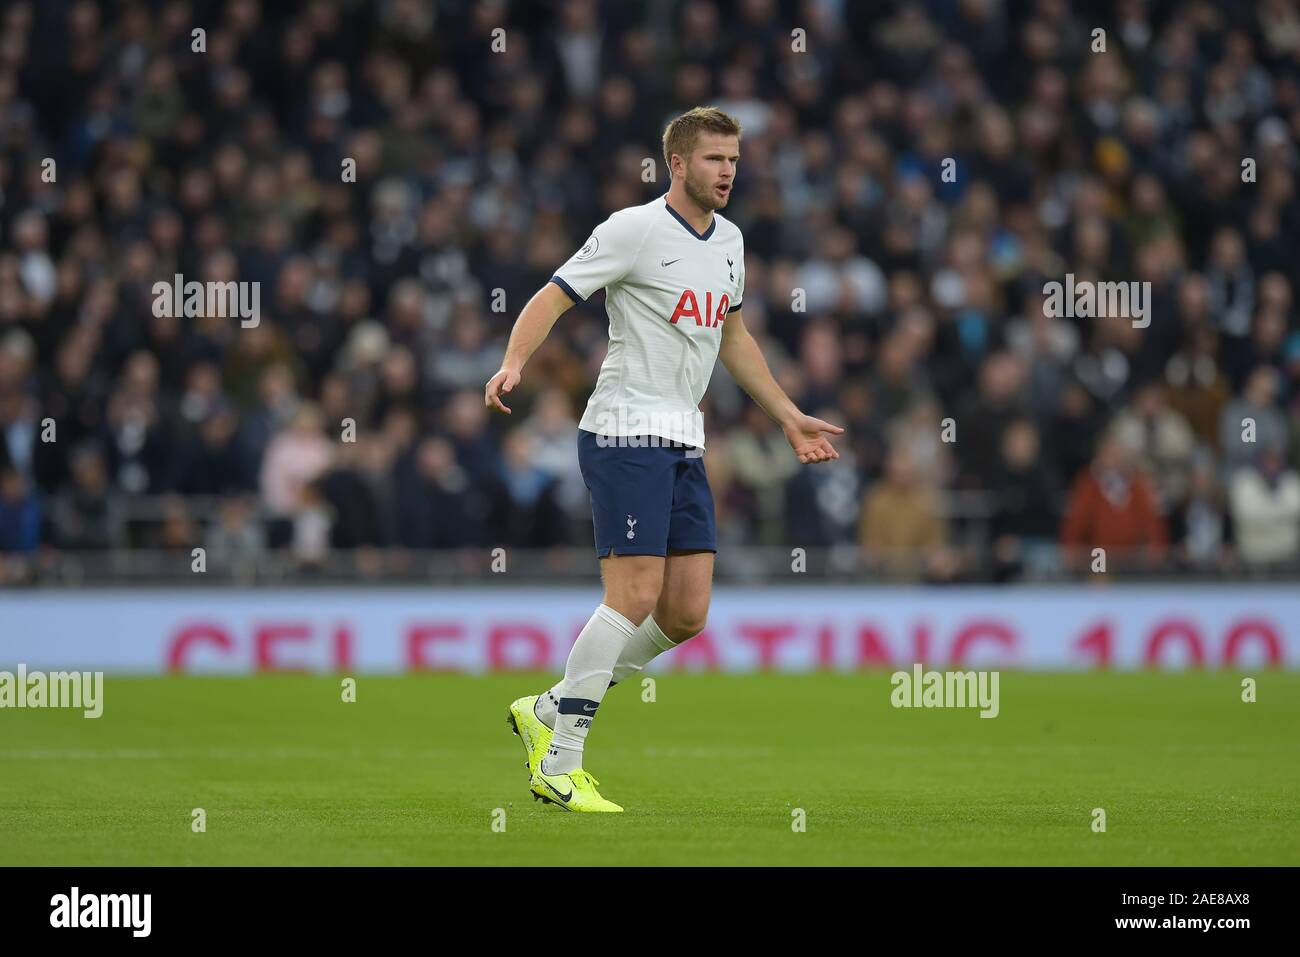 London, UK. 7th December 2019. Eric Dier of Tottenham Hotspur during the Tottenham Hotspur vs Burnley Premier League Football match at the Tottenham Hotspur Stadium on 7th December 2019-EDITORIAL USE ONLY No use with unauthorised audio, video, data, fixture lists (outside the EU), club/league logos or 'live' services. Online in-match use limited to 45 images (+15 in extra time). No use to emulate moving images. No use in betting, games or single club/league/player publications/services- Credit: Martin Dalton/Alamy Live News Stock Photo